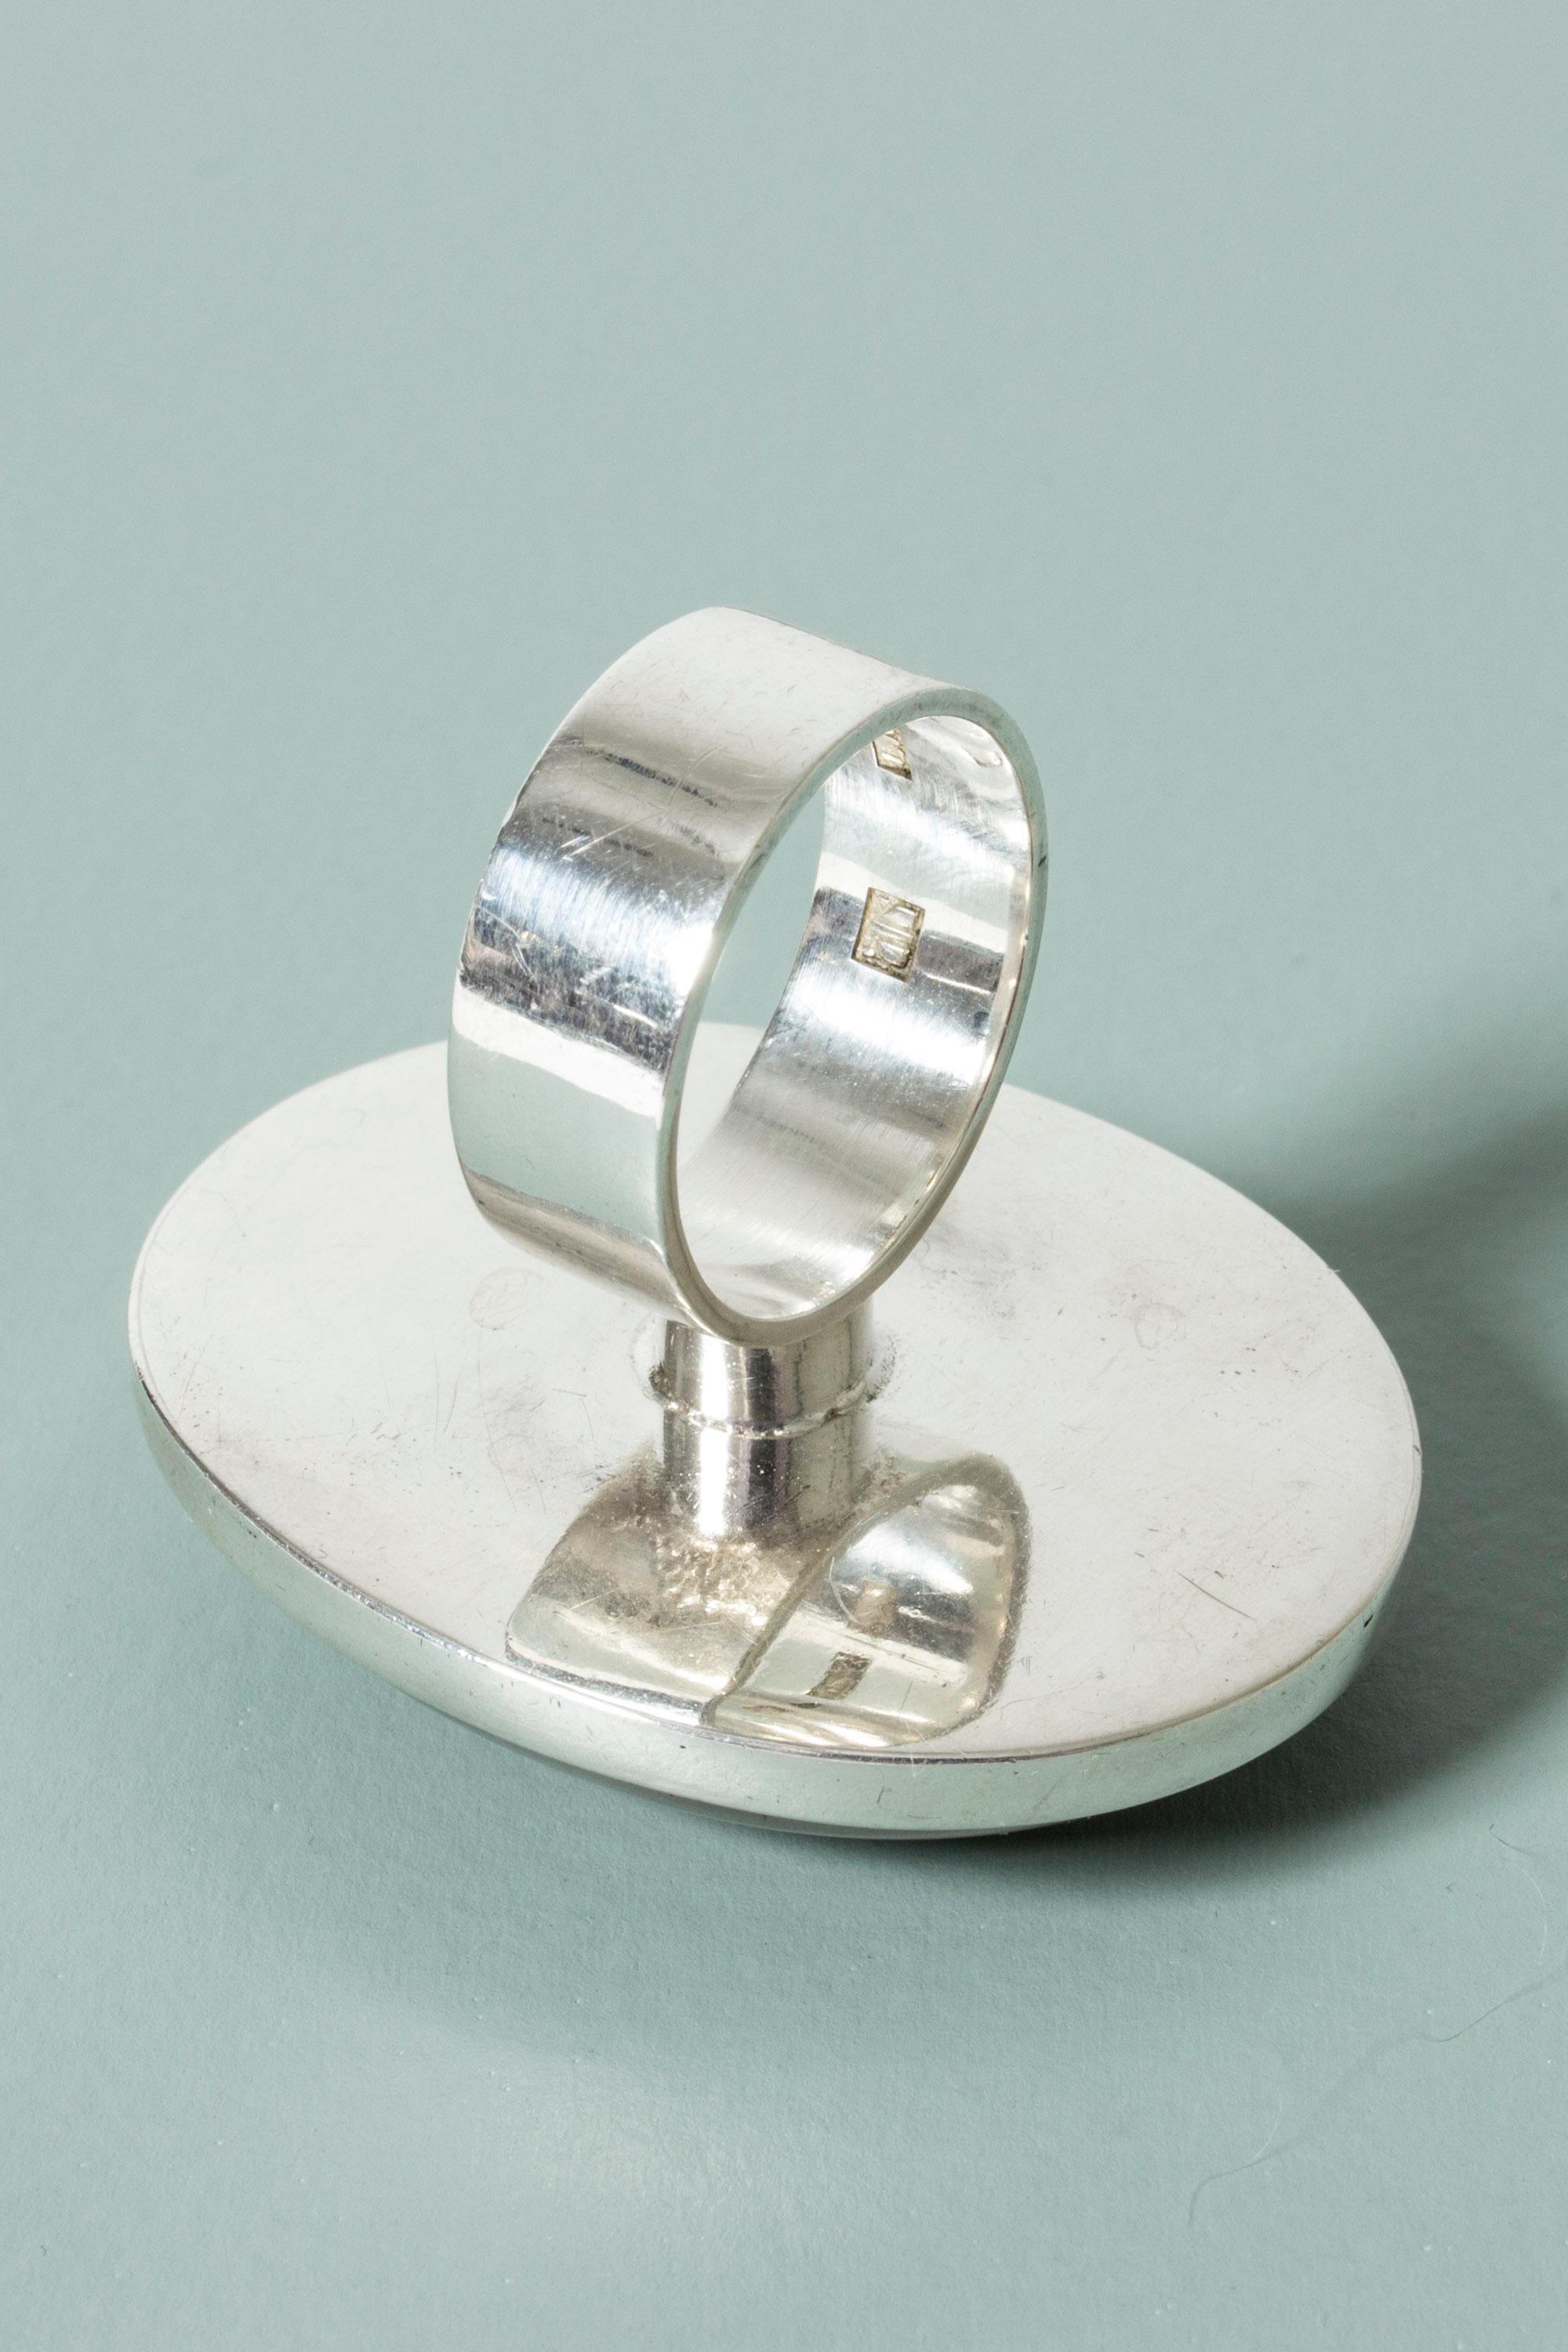 Silver and Agate Ring from Kaunis Koru, Finland, 1974 1